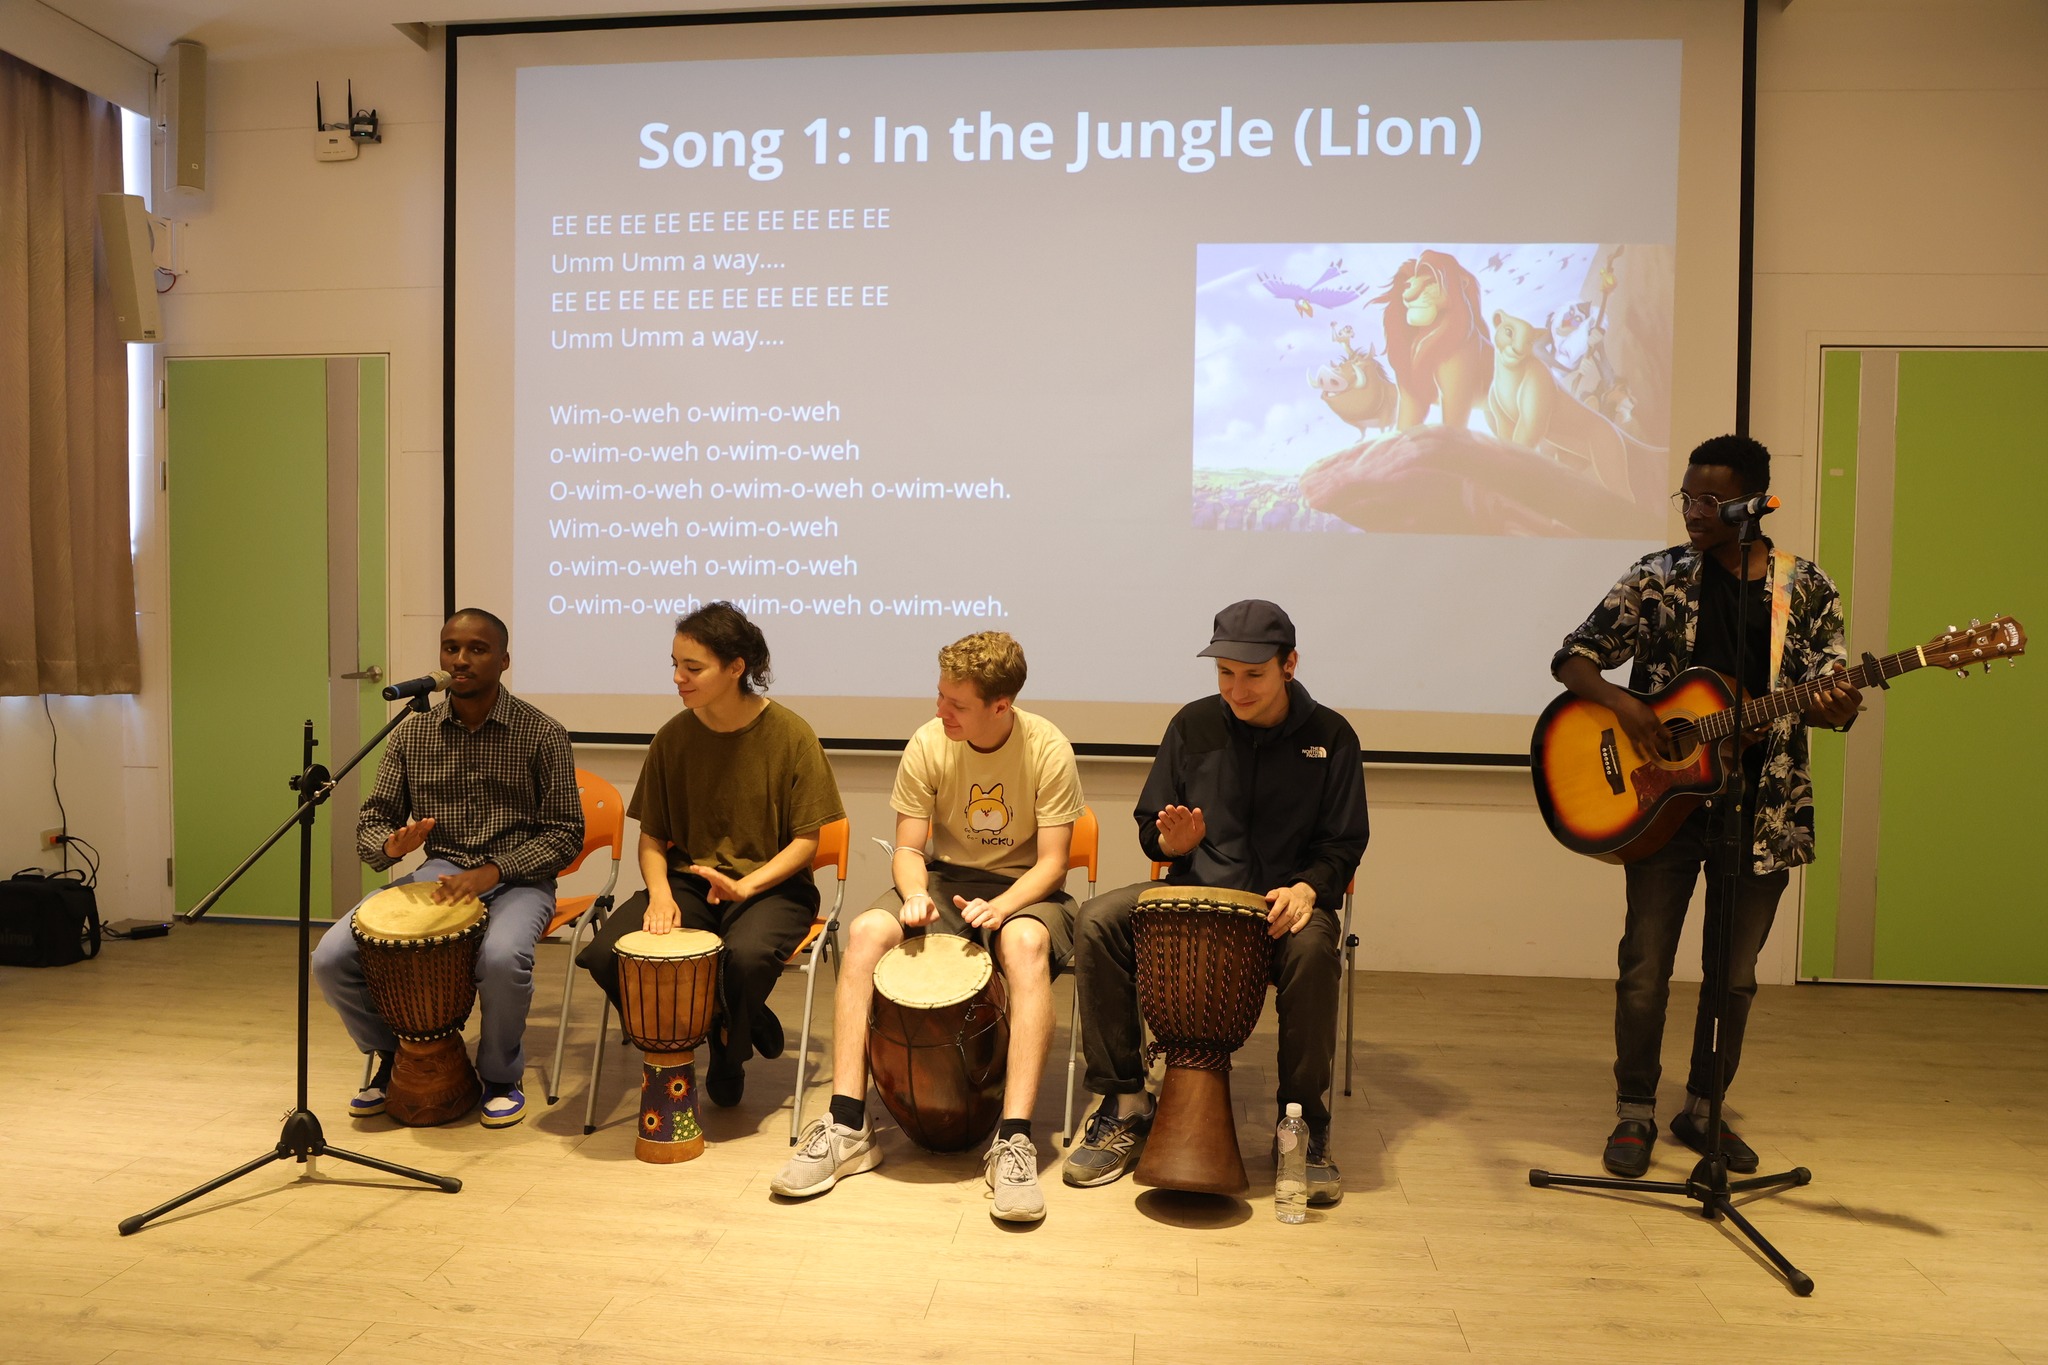 African drum performance by foreign students allows Taiwanese teachers and students to experience African culture.  Photo reproduced from 家齊高中點點滴滴